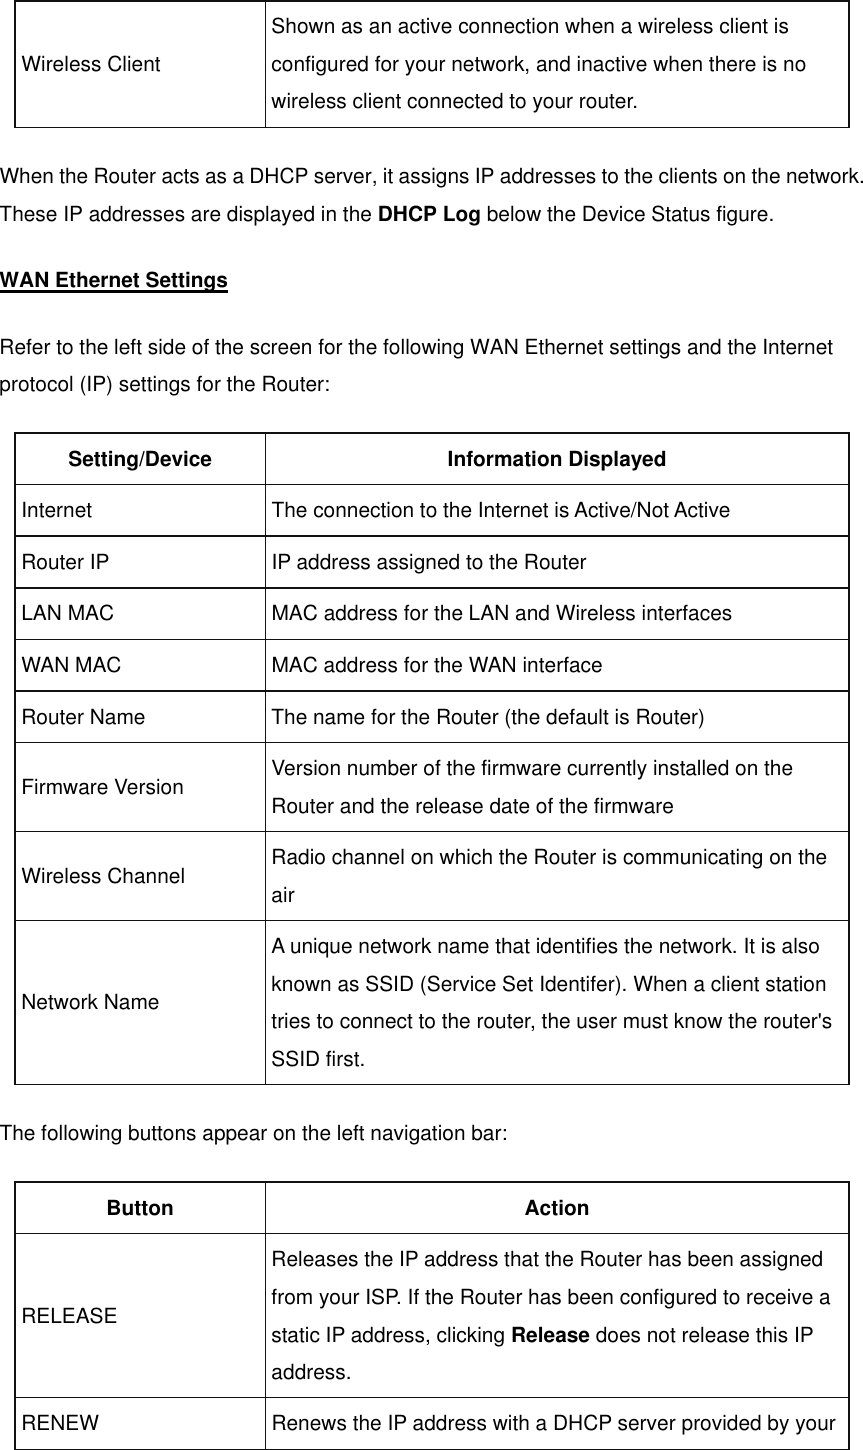 Wireless Client   Shown as an active connection when a wireless client is configured for your network, and inactive when there is no wireless client connected to your router. When the Router acts as a DHCP server, it assigns IP addresses to the clients on the network. These IP addresses are displayed in the DHCP Log below the Device Status figure. WAN Ethernet Settings Refer to the left side of the screen for the following WAN Ethernet settings and the Internet protocol (IP) settings for the Router: Setting/Device Information Displayed Internet  The connection to the Internet is Active/Not Active Router IP  IP address assigned to the Router LAN MAC  MAC address for the LAN and Wireless interfaces WAN MAC  MAC address for the WAN interface Router Name  The name for the Router (the default is Router) Firmware Version  Version number of the firmware currently installed on the Router and the release date of the firmware Wireless Channel  Radio channel on which the Router is communicating on the air Network Name A unique network name that identifies the network. It is also known as SSID (Service Set Identifer). When a client station tries to connect to the router, the user must know the router&apos;s SSID first. The following buttons appear on the left navigation bar: Button Action RELEASE Releases the IP address that the Router has been assigned from your ISP. If the Router has been configured to receive a static IP address, clicking Release does not release this IP address. RENEW  Renews the IP address with a DHCP server provided by your 